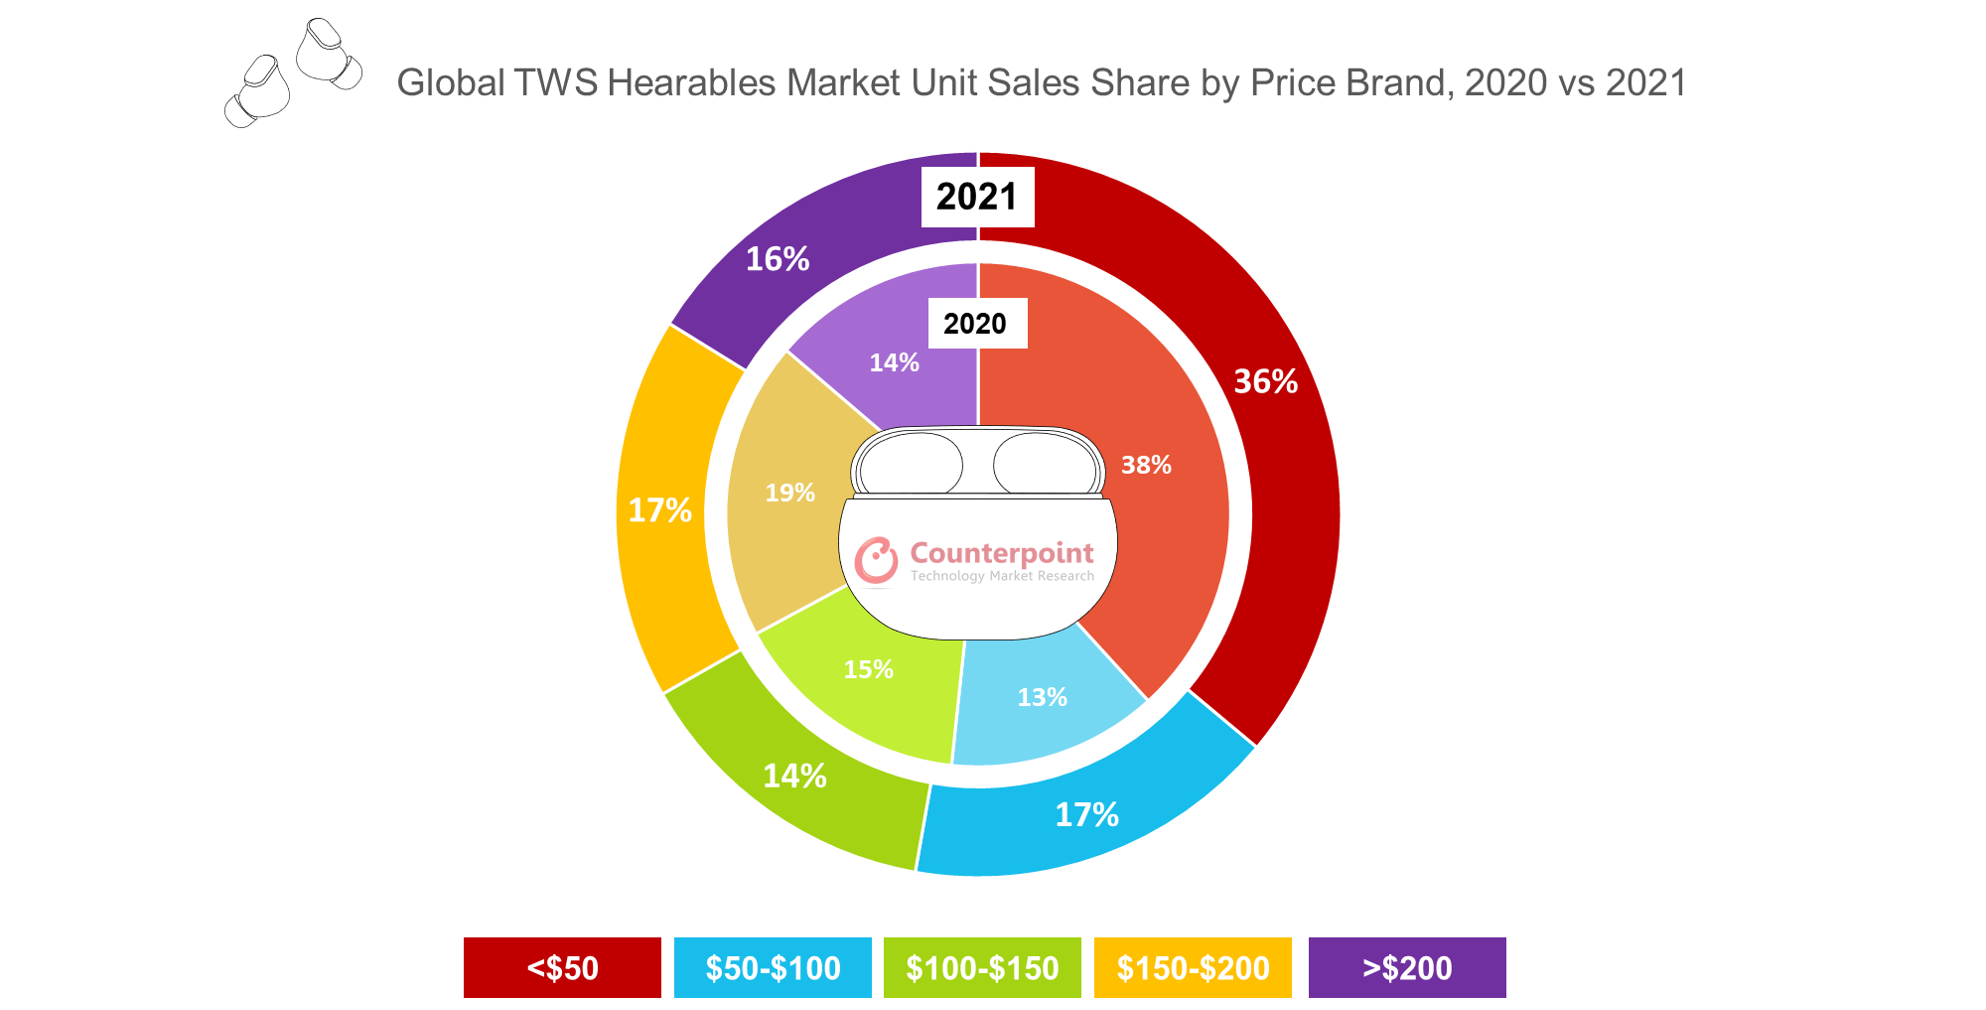 Counterpoint Research Global TWS Hearables Market Unit Sales Share by Price Brand, 2020 vs 2021